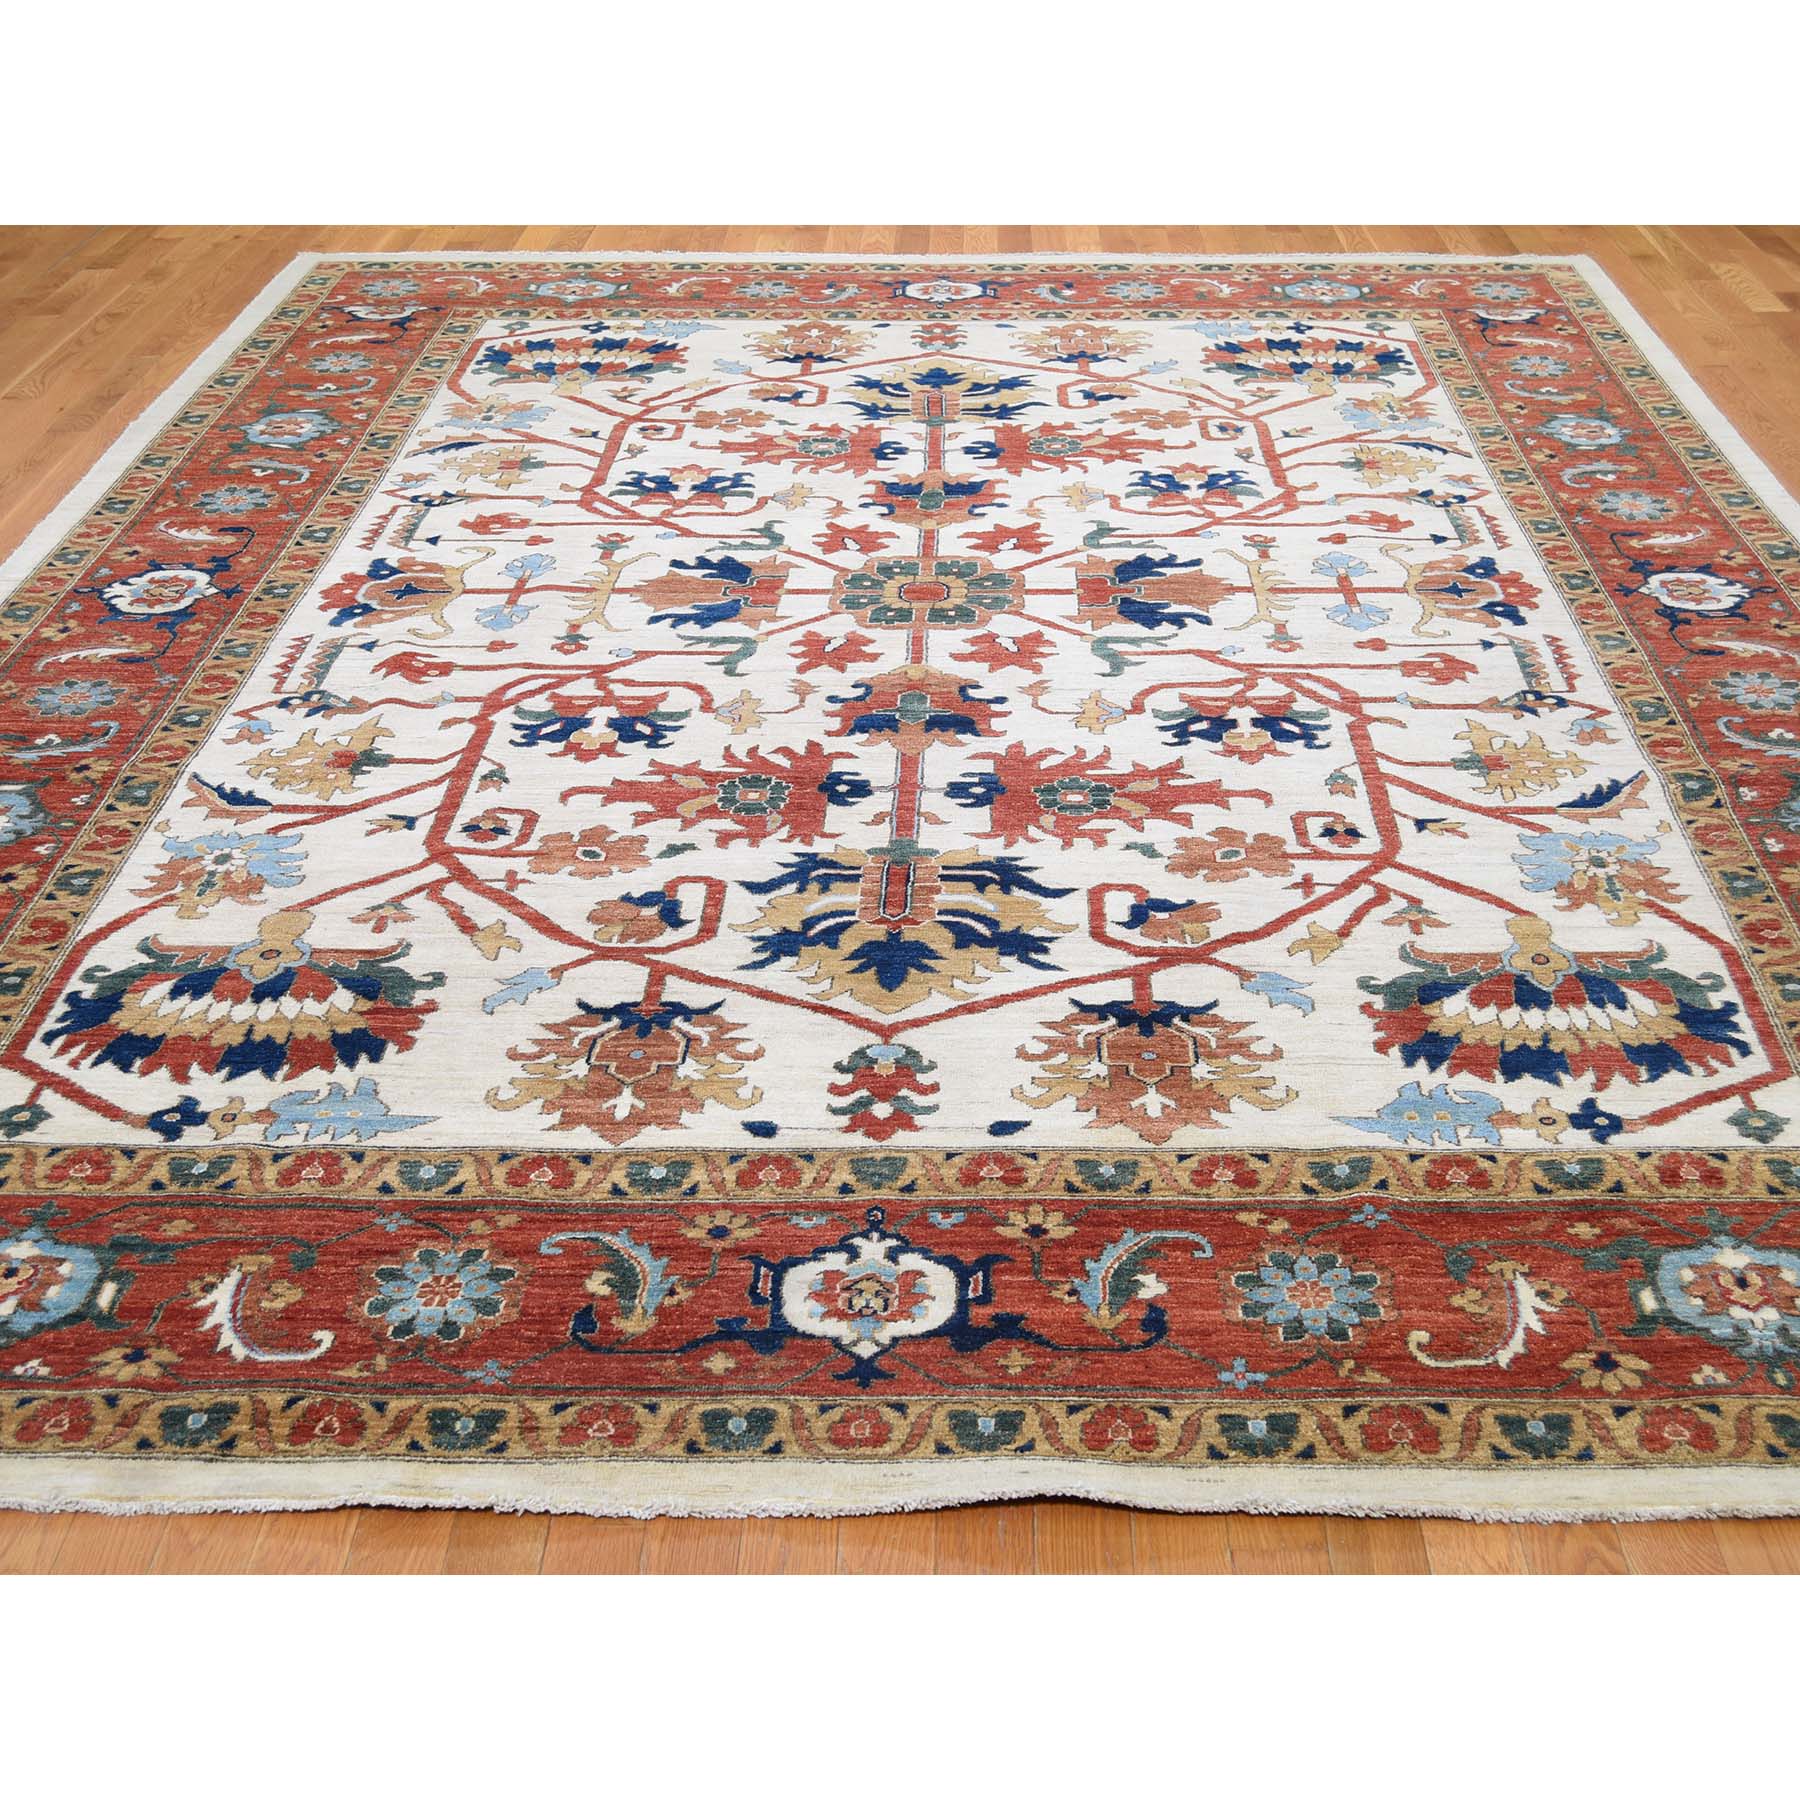 10-2 x13-10  Peshawar Pure Wool All-over Heriz Design Hand-Knotted Oriental Rug 